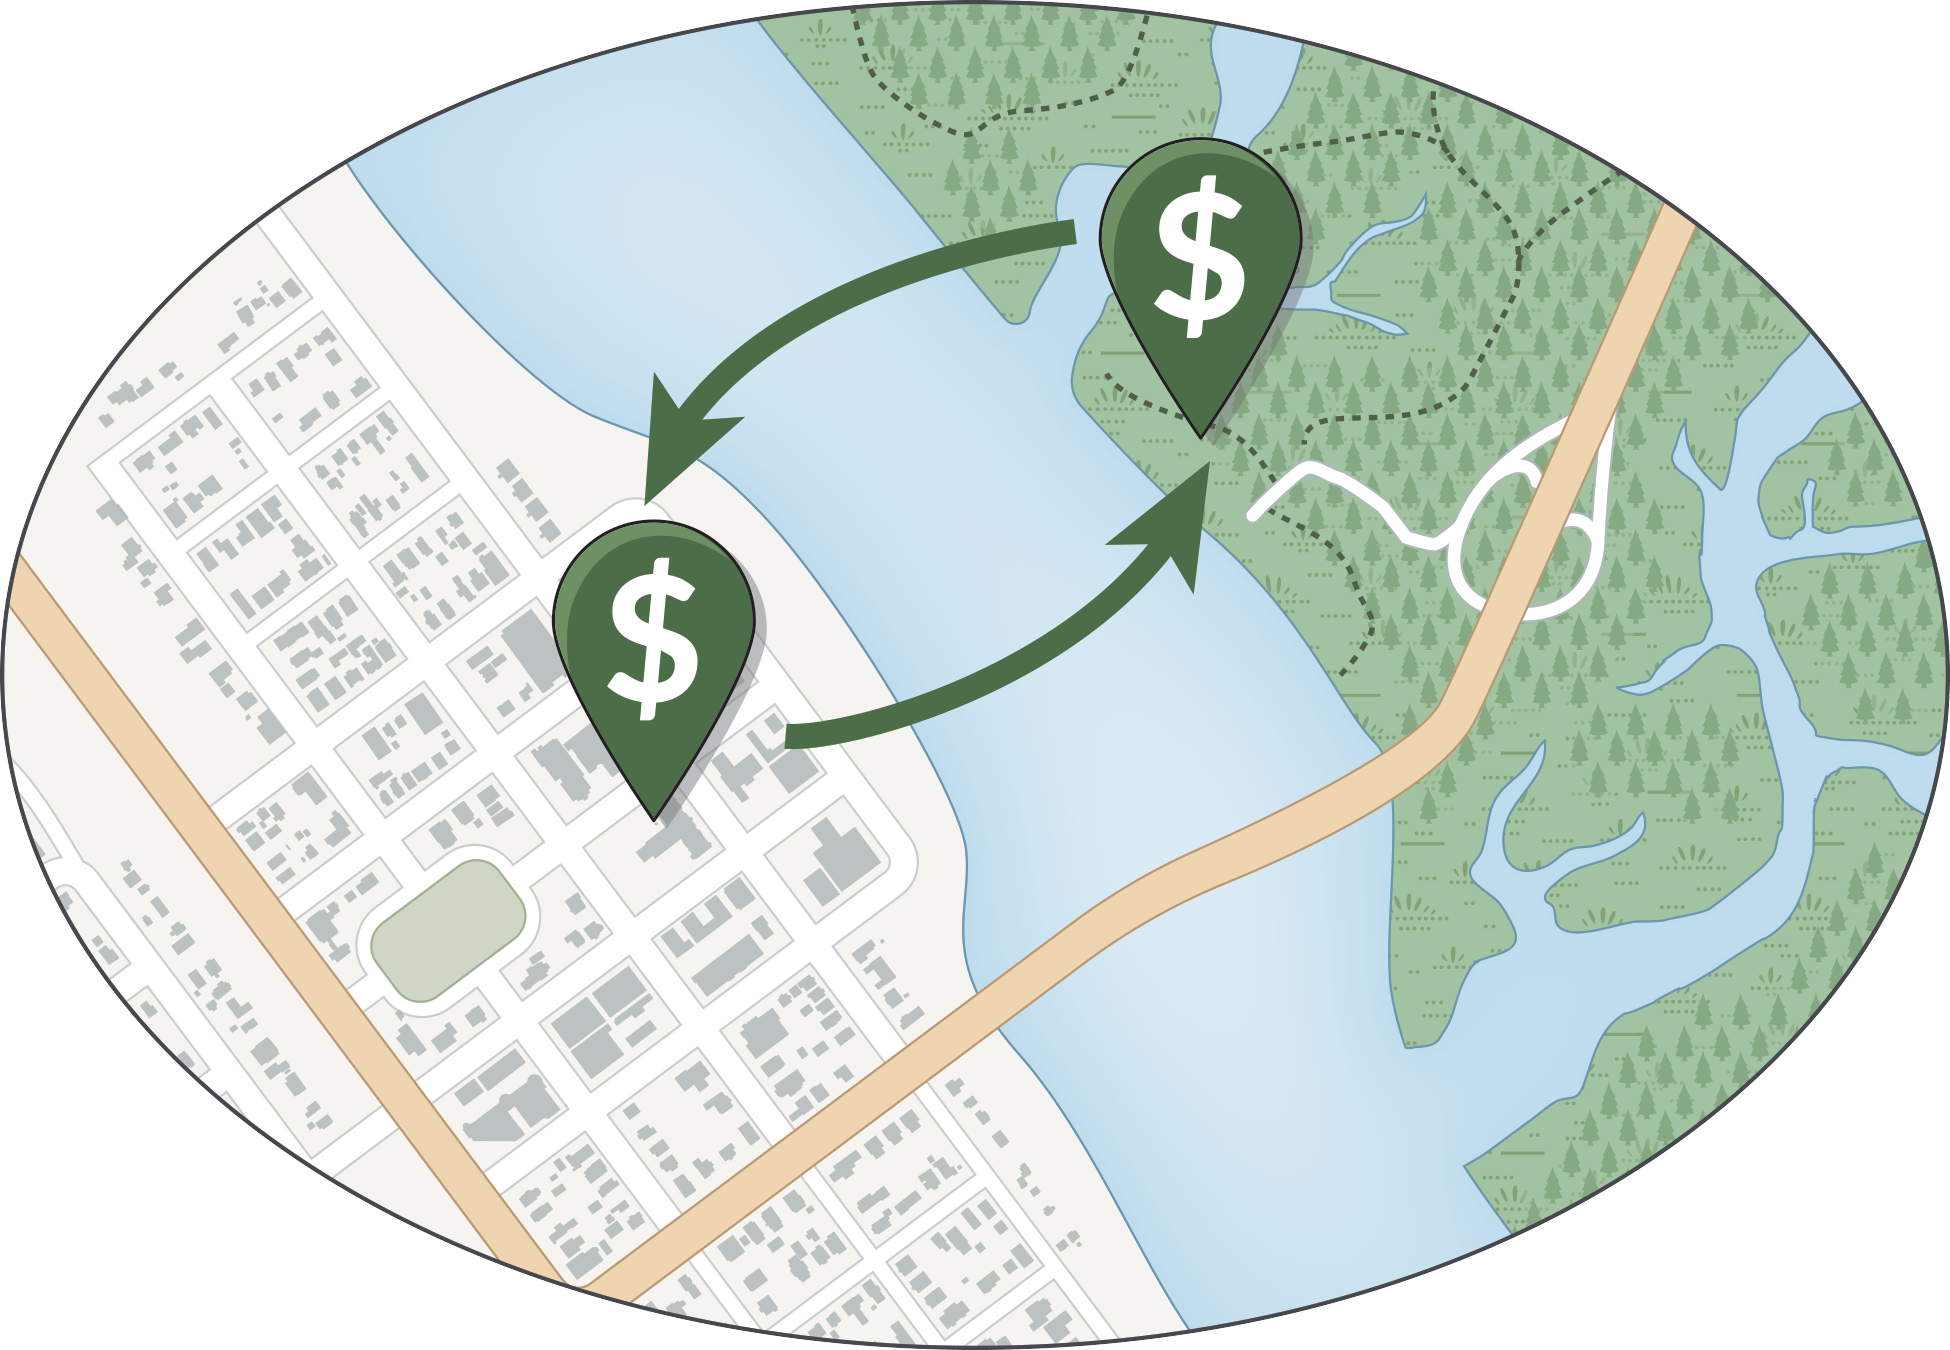 An illustration of the flow of money between the city and estuaries divided by the river. 